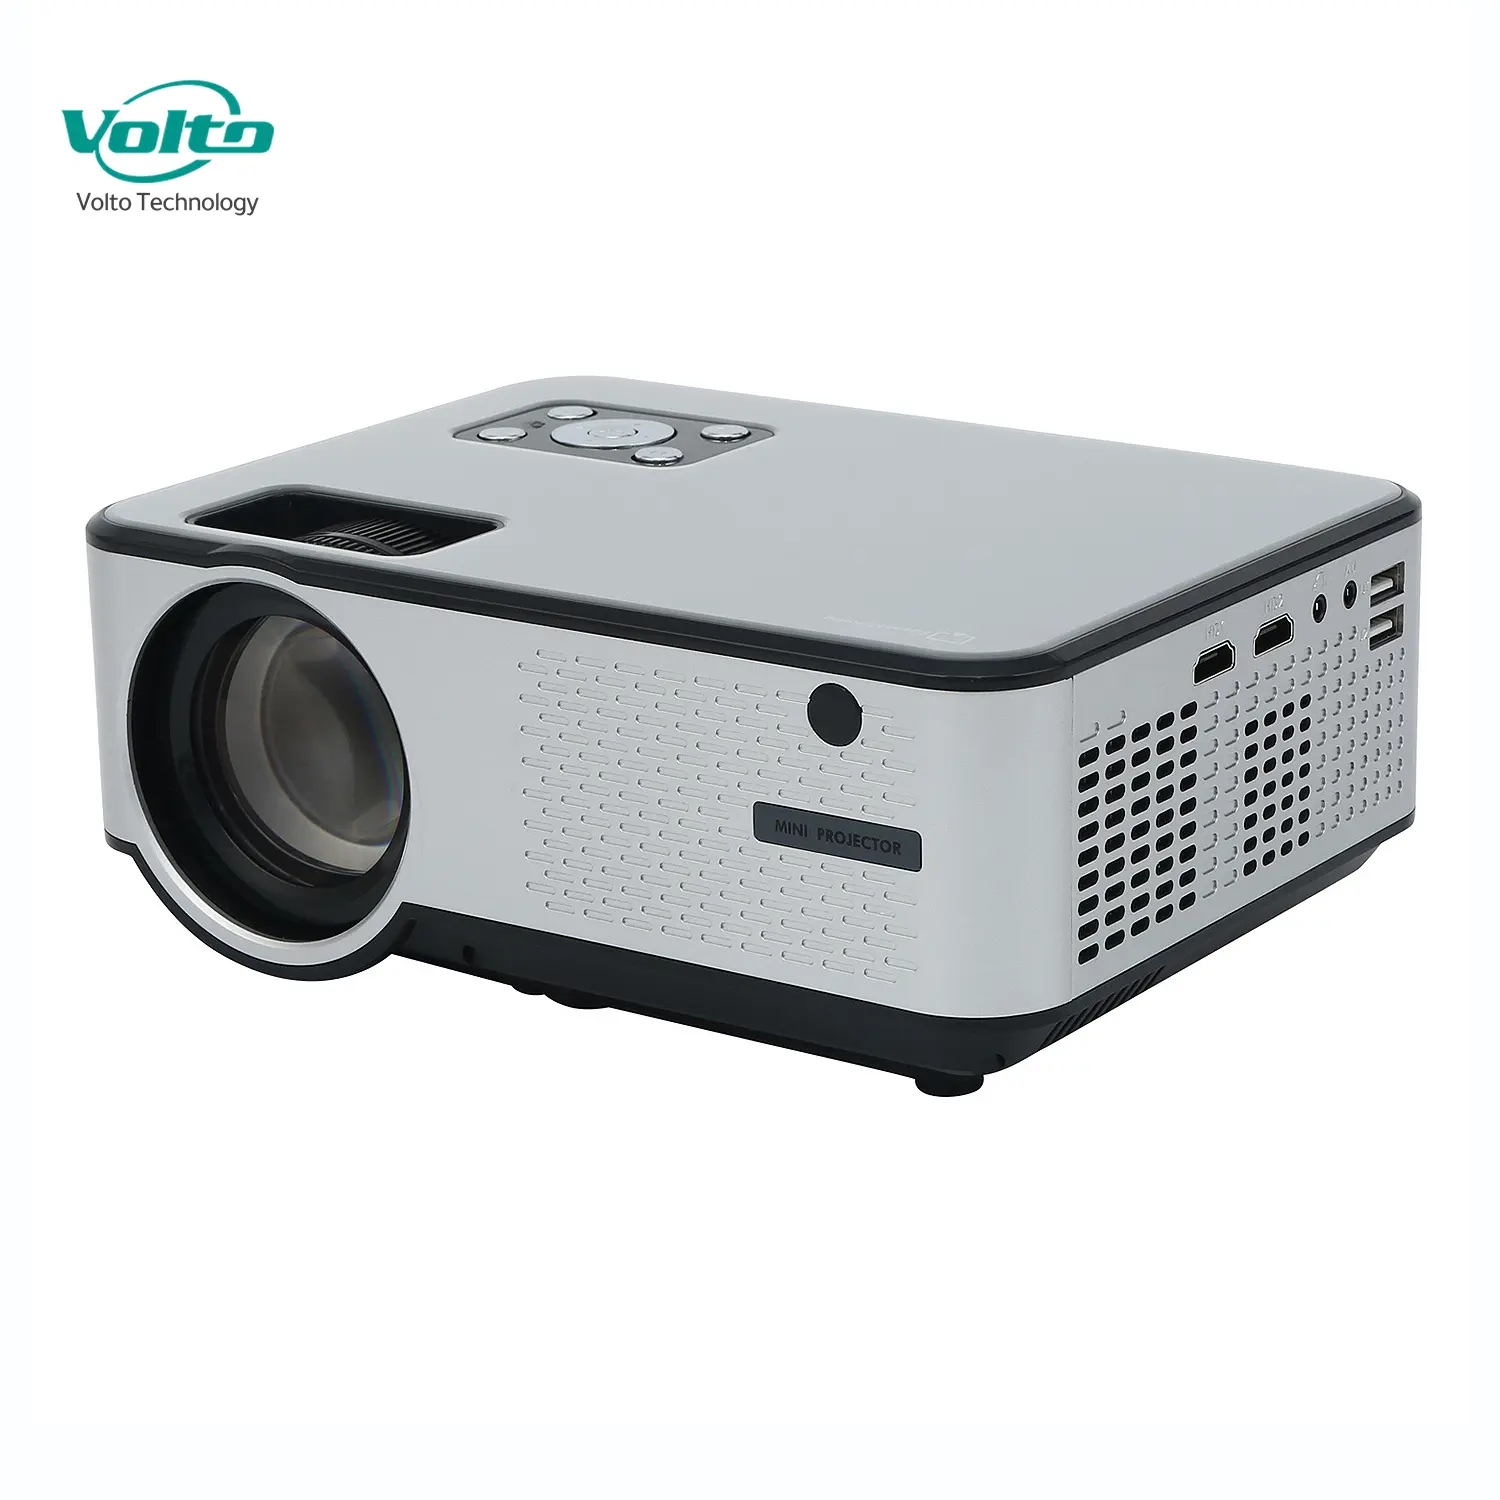 Home Theater Mini <span class=keywords><strong>proiettore</strong></span> Video Top Sell Pocket OEM ODM Smart <span class=keywords><strong>Lcd</strong></span> portatile 1080p proiettori <span class=keywords><strong>proiettore</strong></span> digitale <span class=keywords><strong>lampada</strong></span> a LED 1 anno